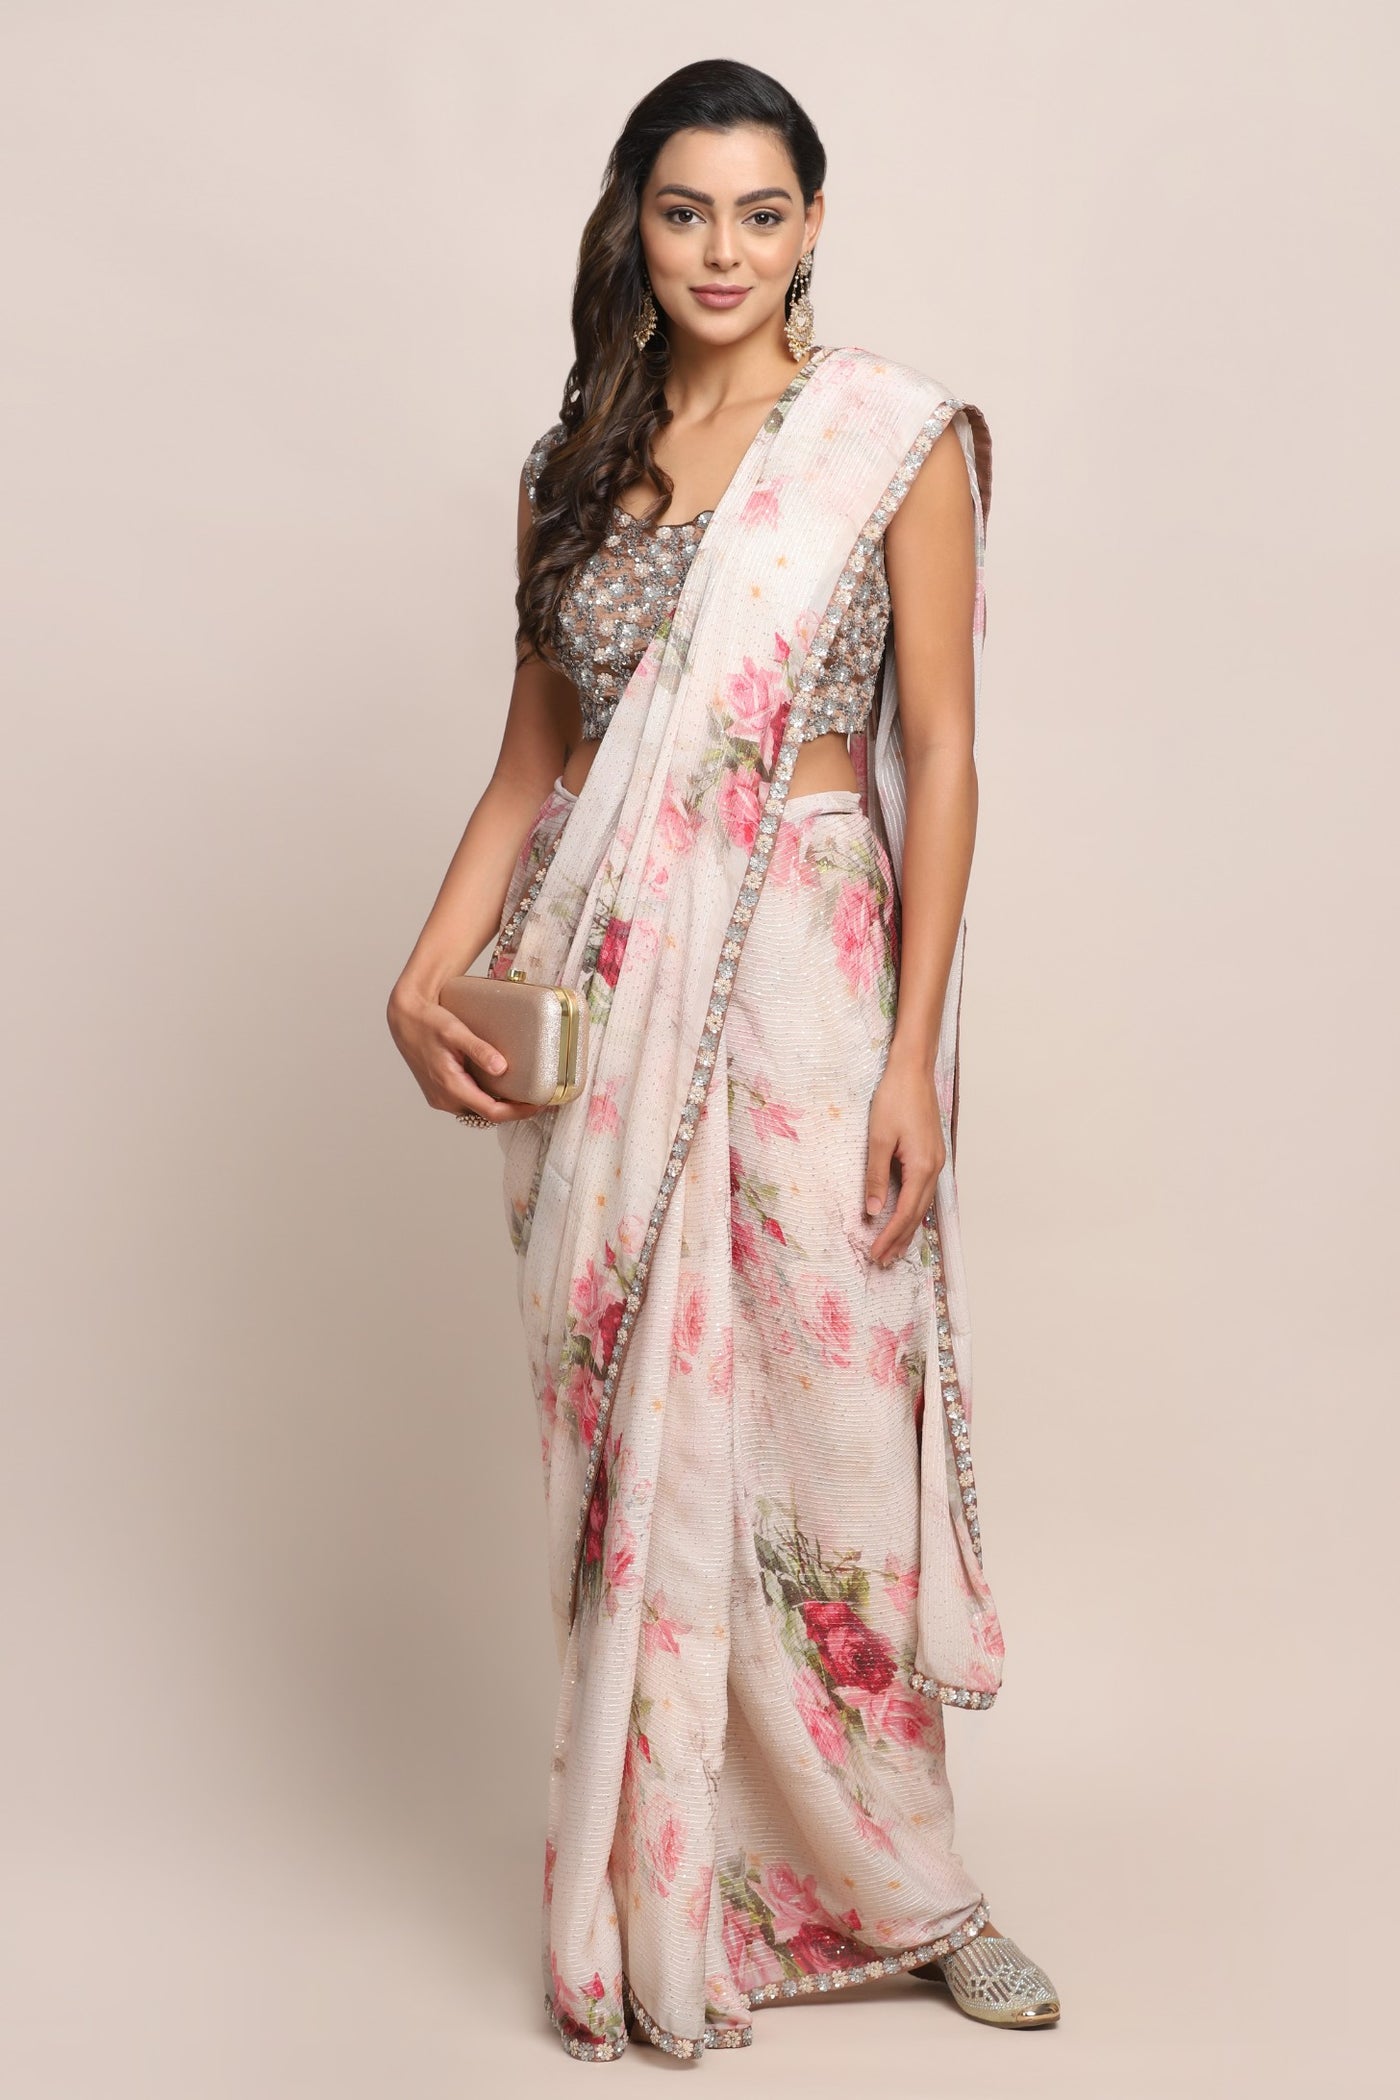 Classy pink color floral motif printed and embroidered saree